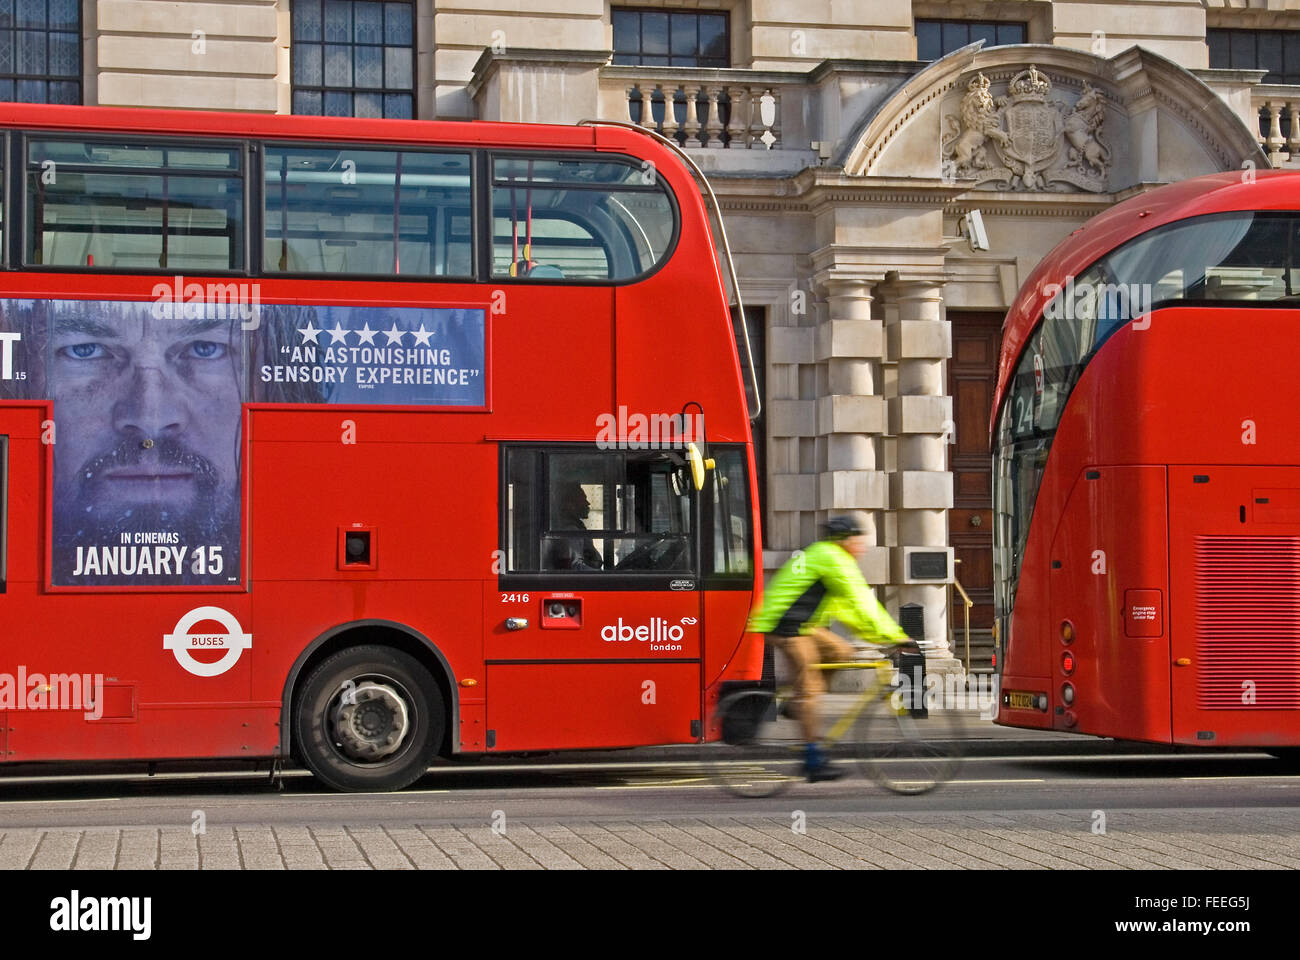 Cyclist wearing high visibility jacket passing red double decker buses on Whitehall in London. London buses are operated by Transport for London. Stock Photo